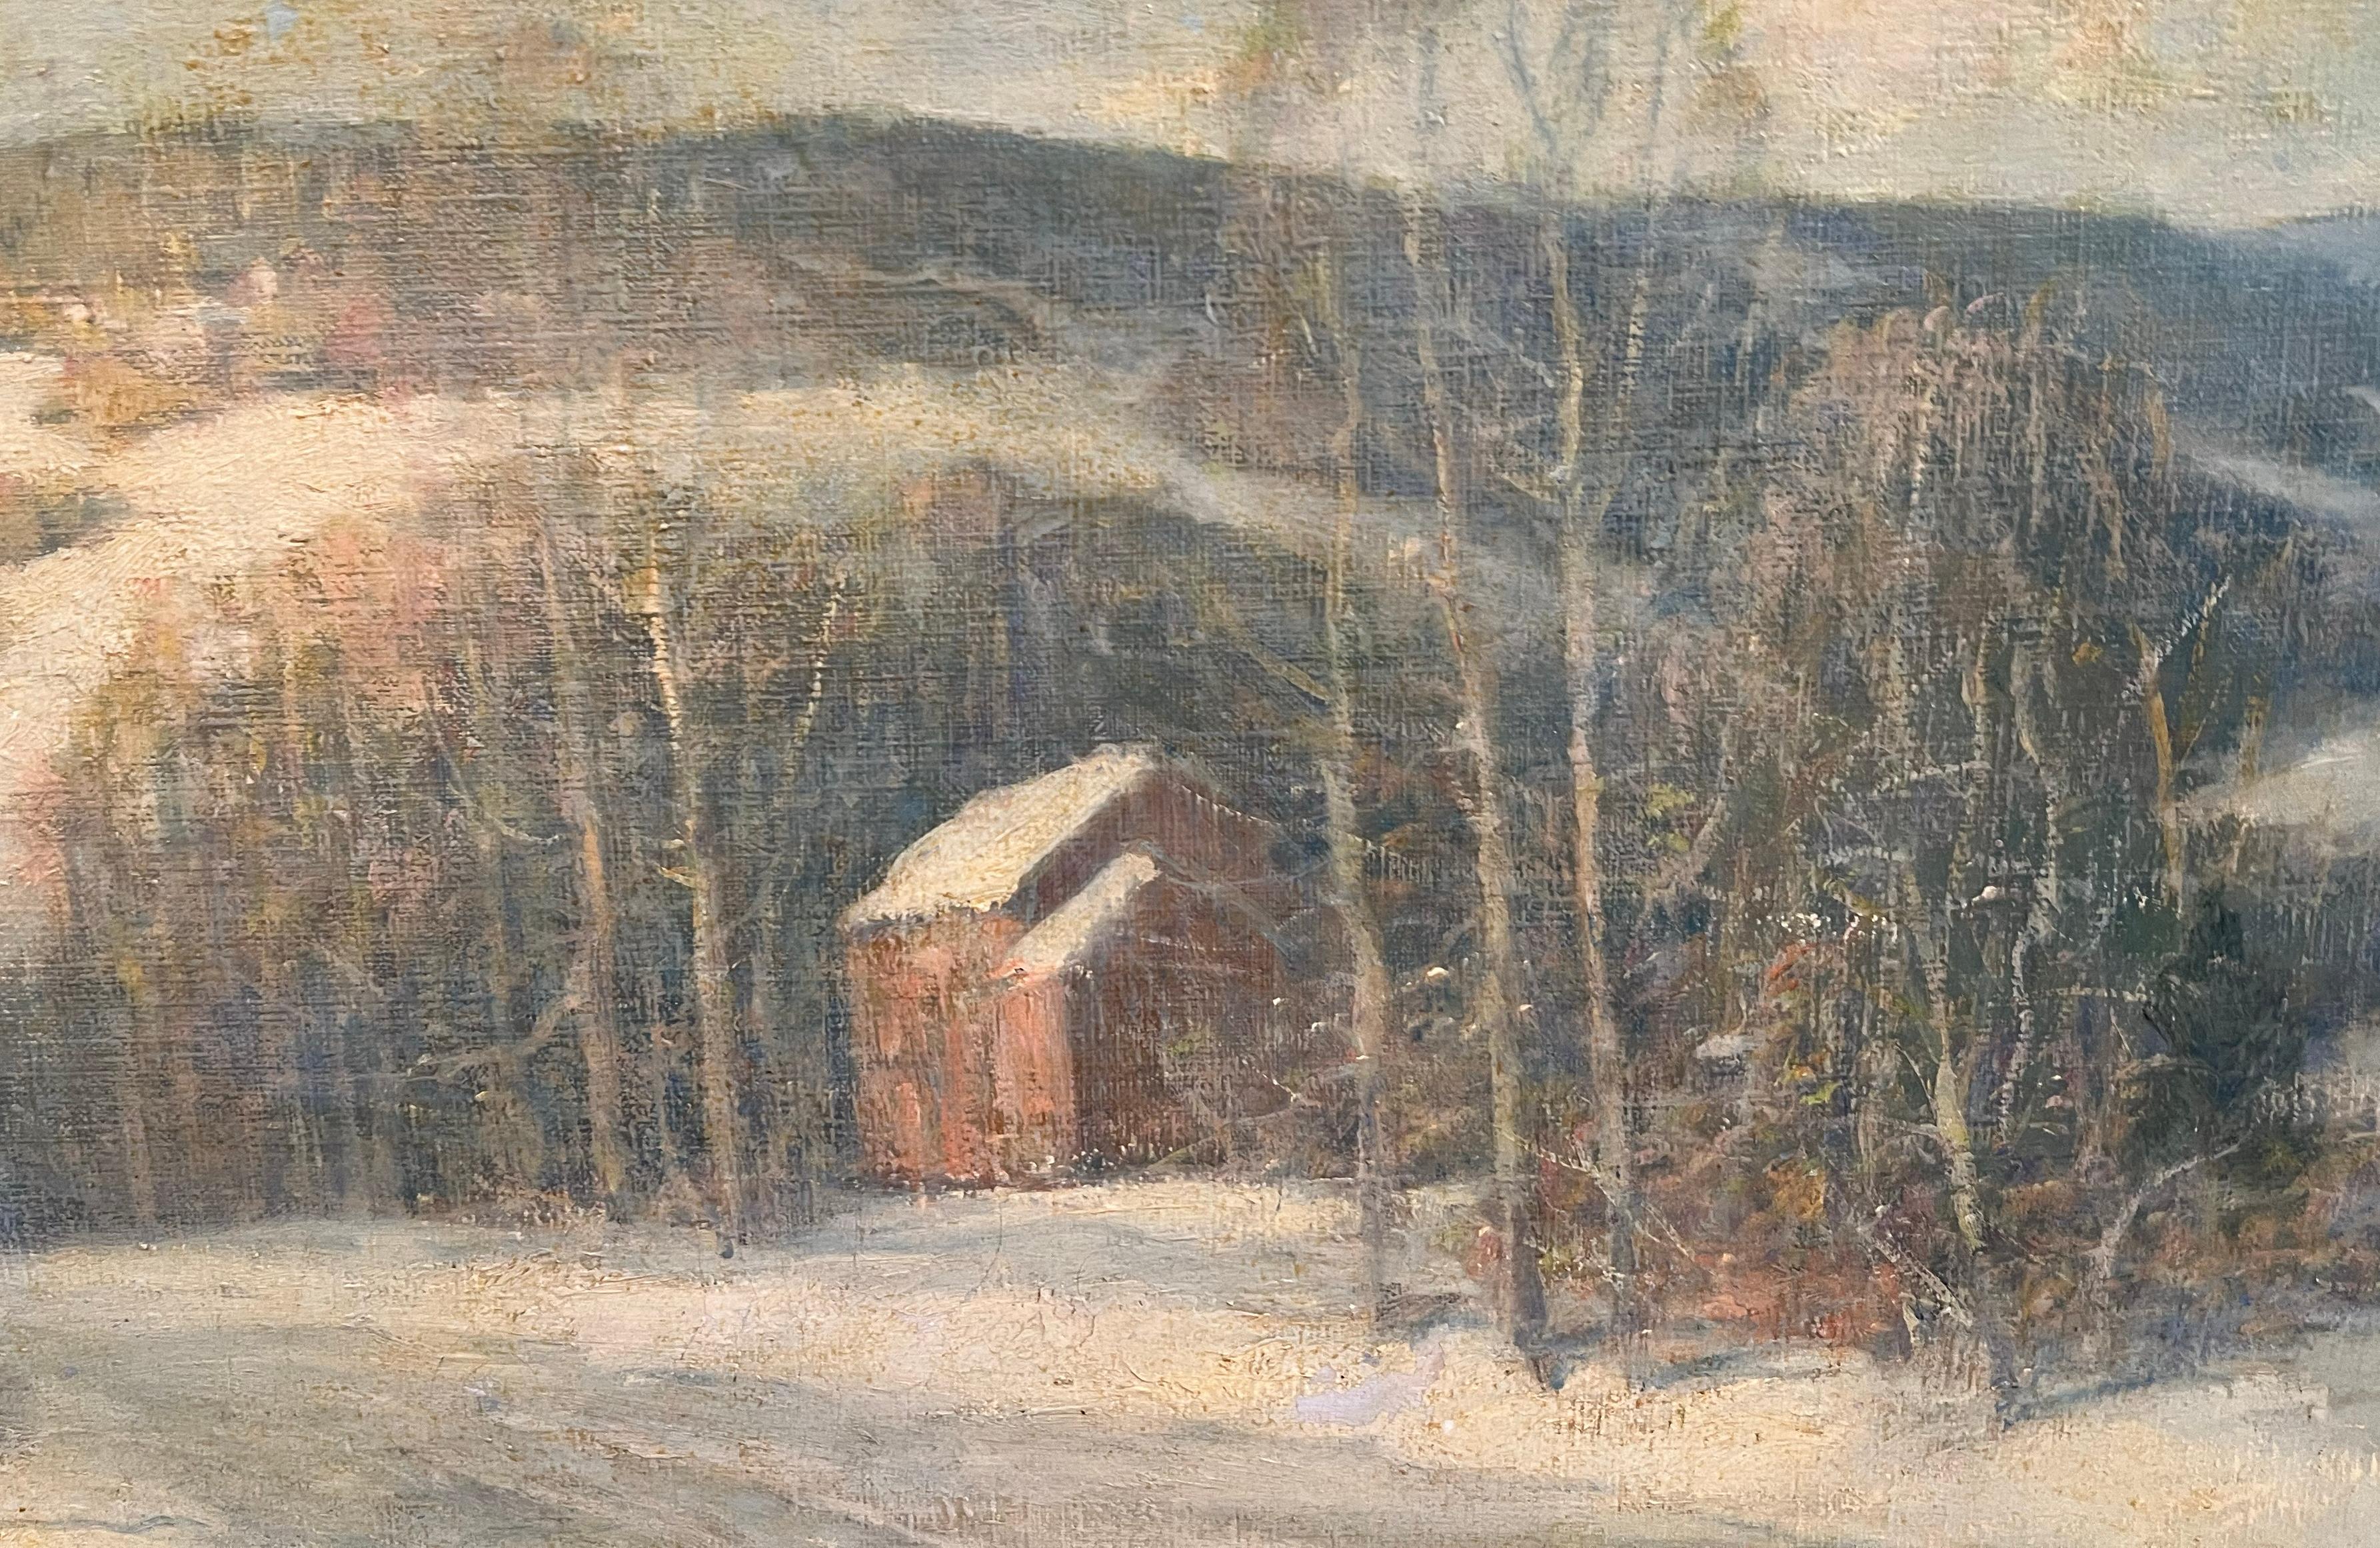 Antique American impressionist winter landscape oil painting by Ernest Albert (1857 - 1946).  Oil on canvas, circa 1900.  Signed.  Framed.  Image size, 24